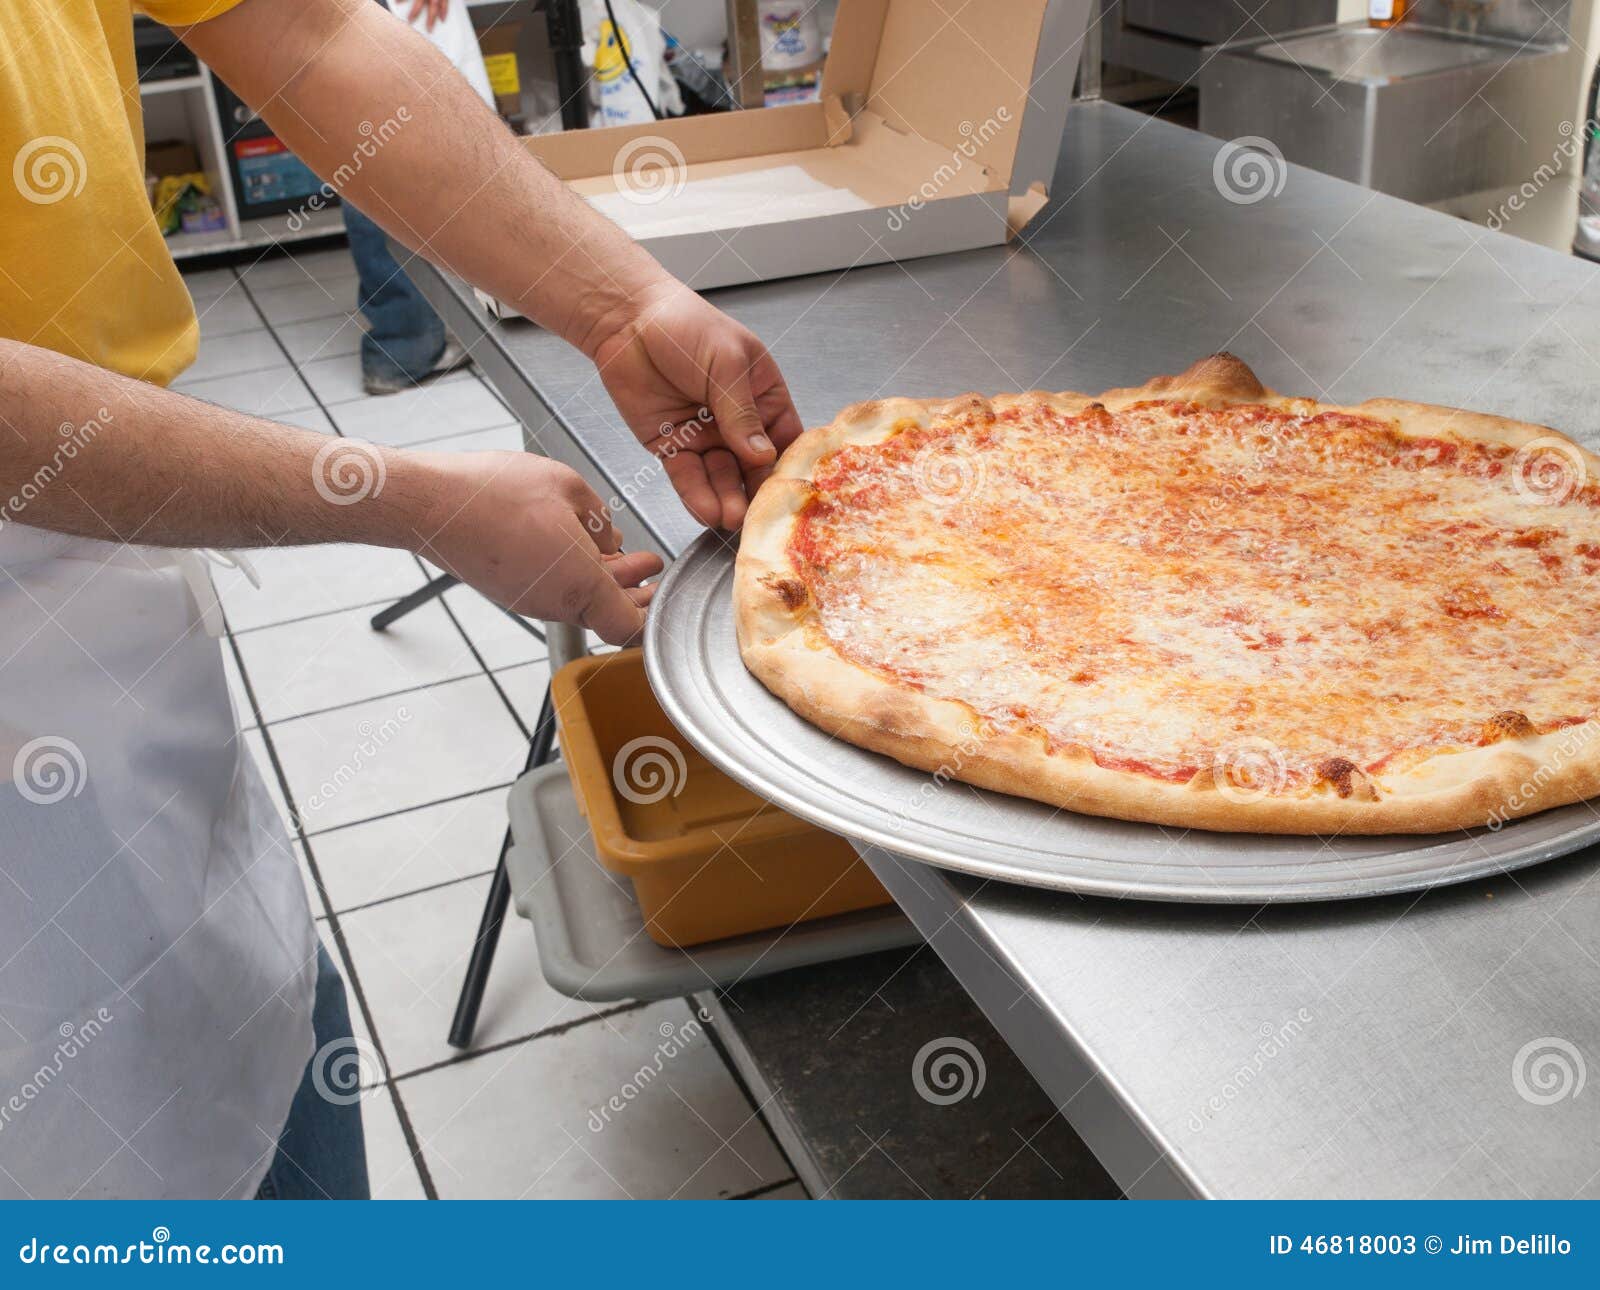 pizza maker removes a fresh pizza from the oven